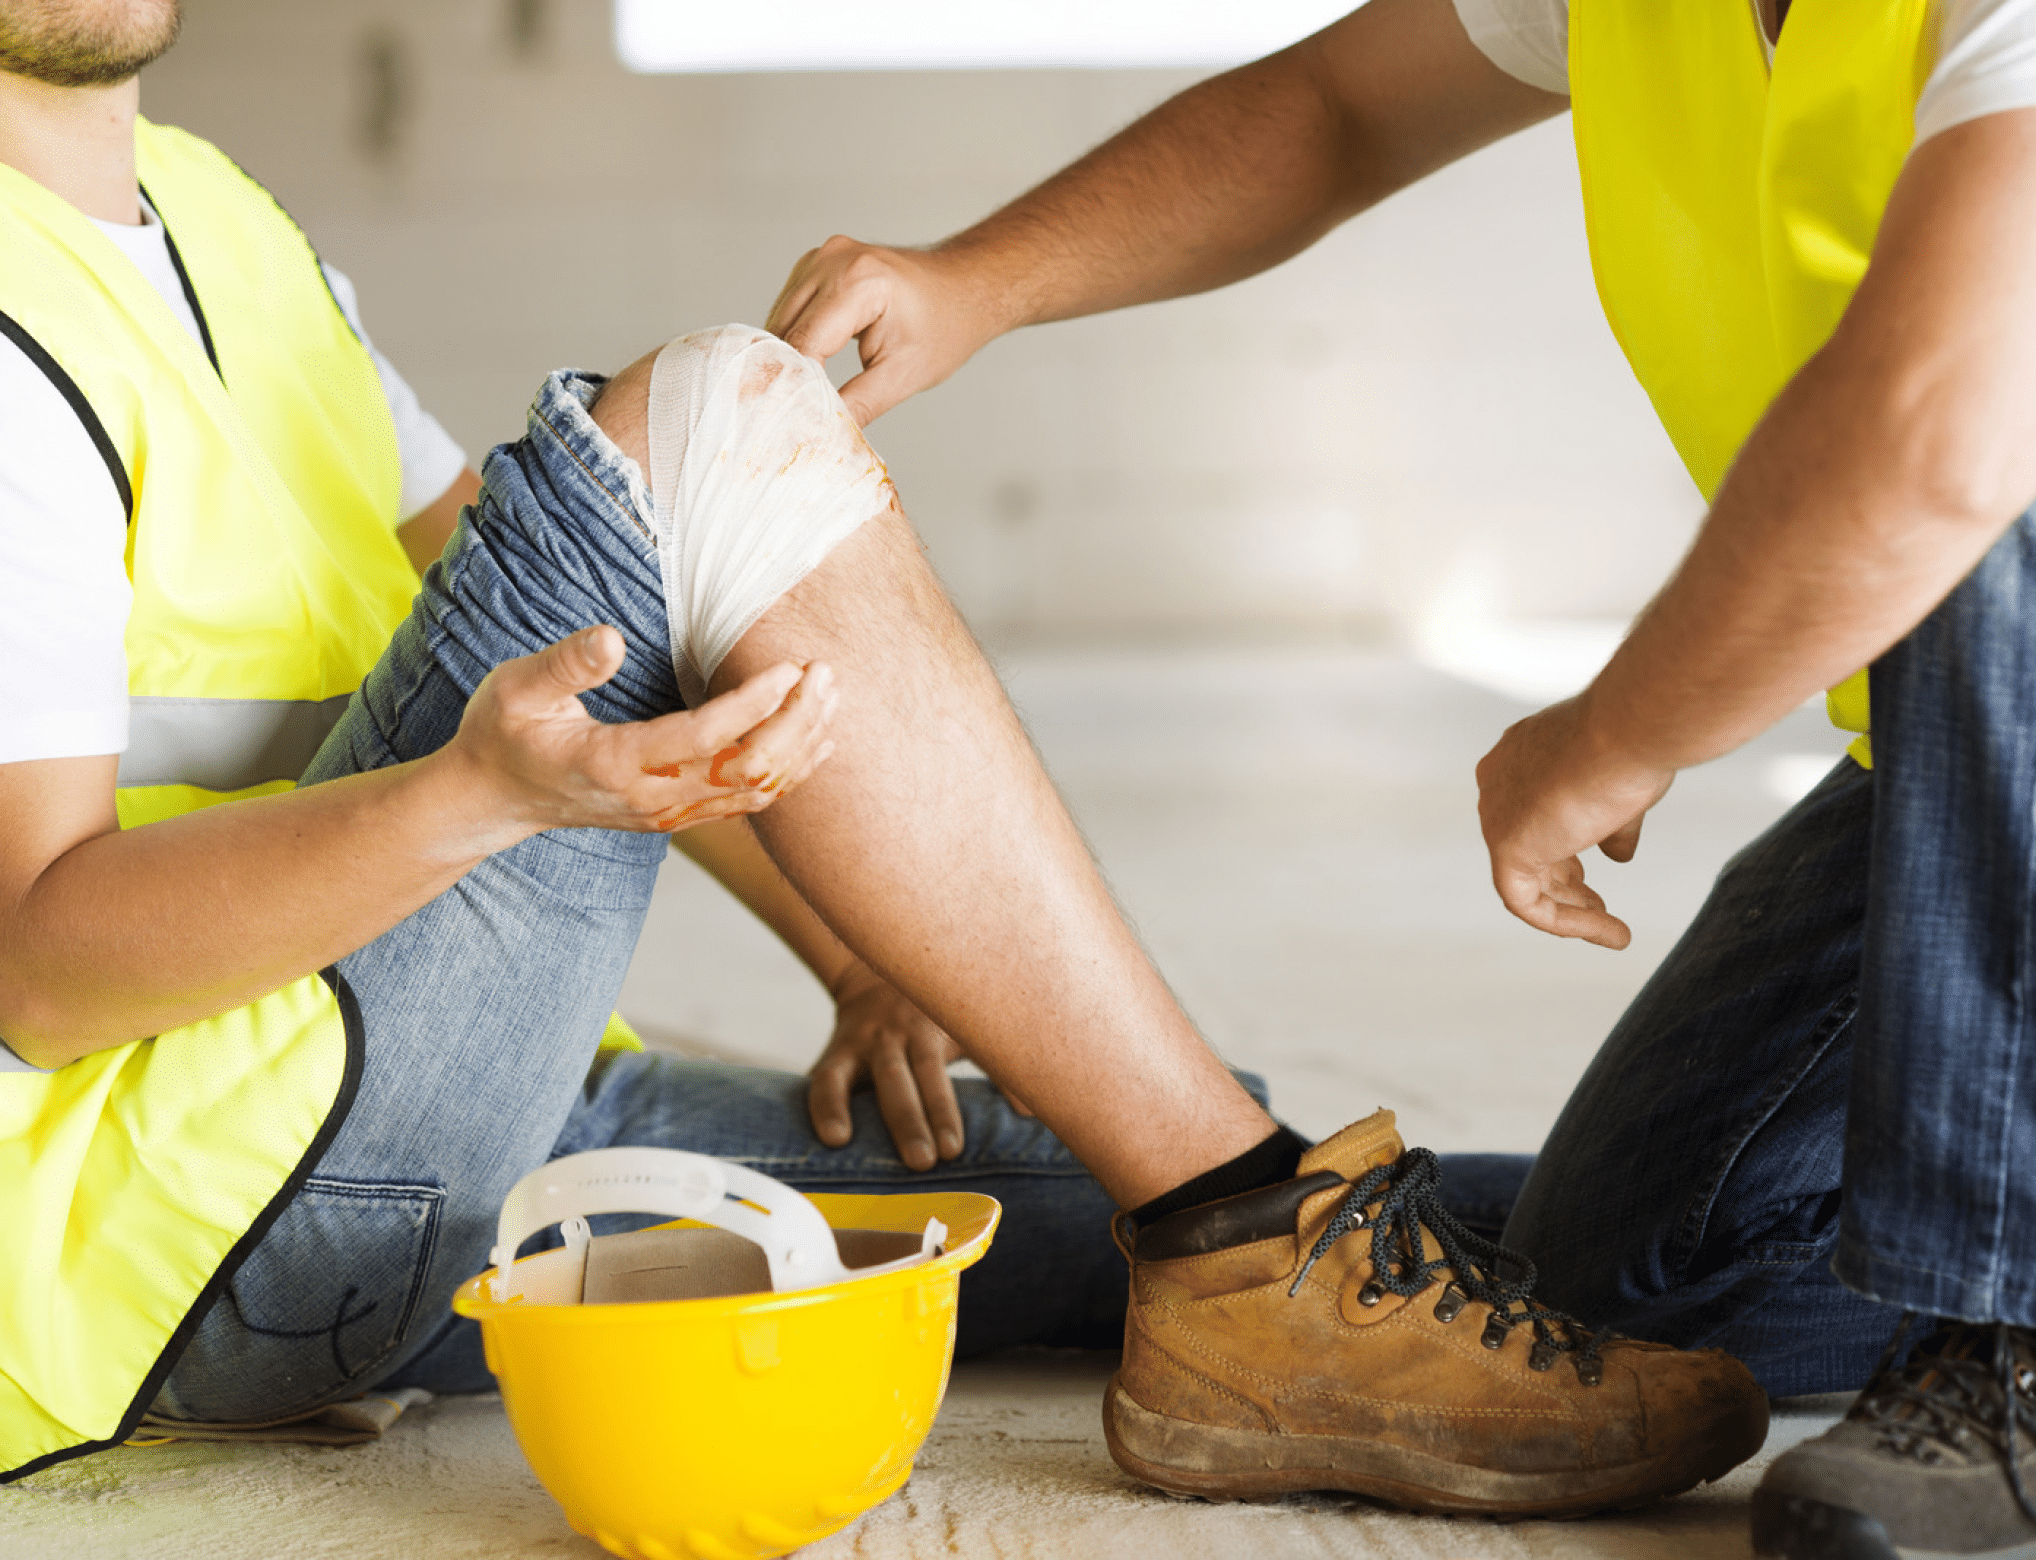 Construction worker knee injury at work